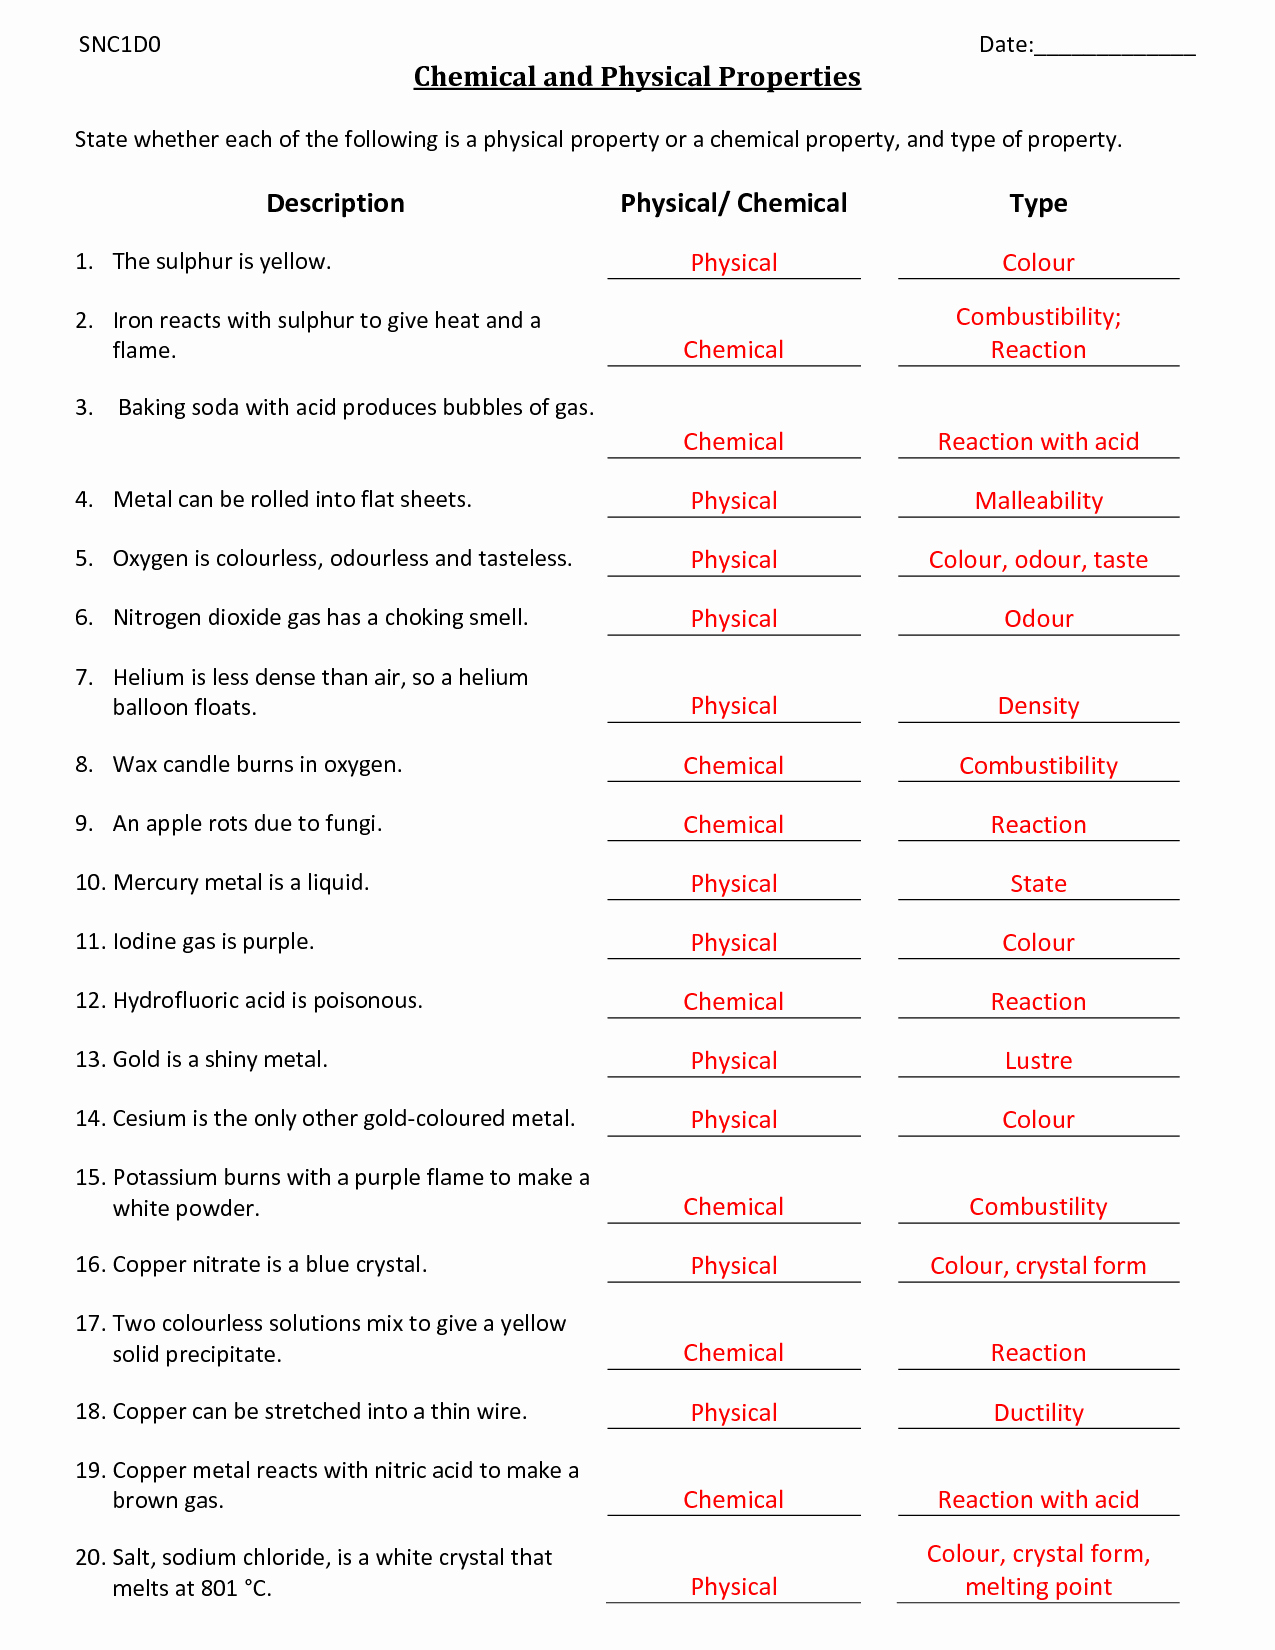 Physical and Chemical Properties Worksheet Beautiful Physical Vs Chemical Properties Worksheets